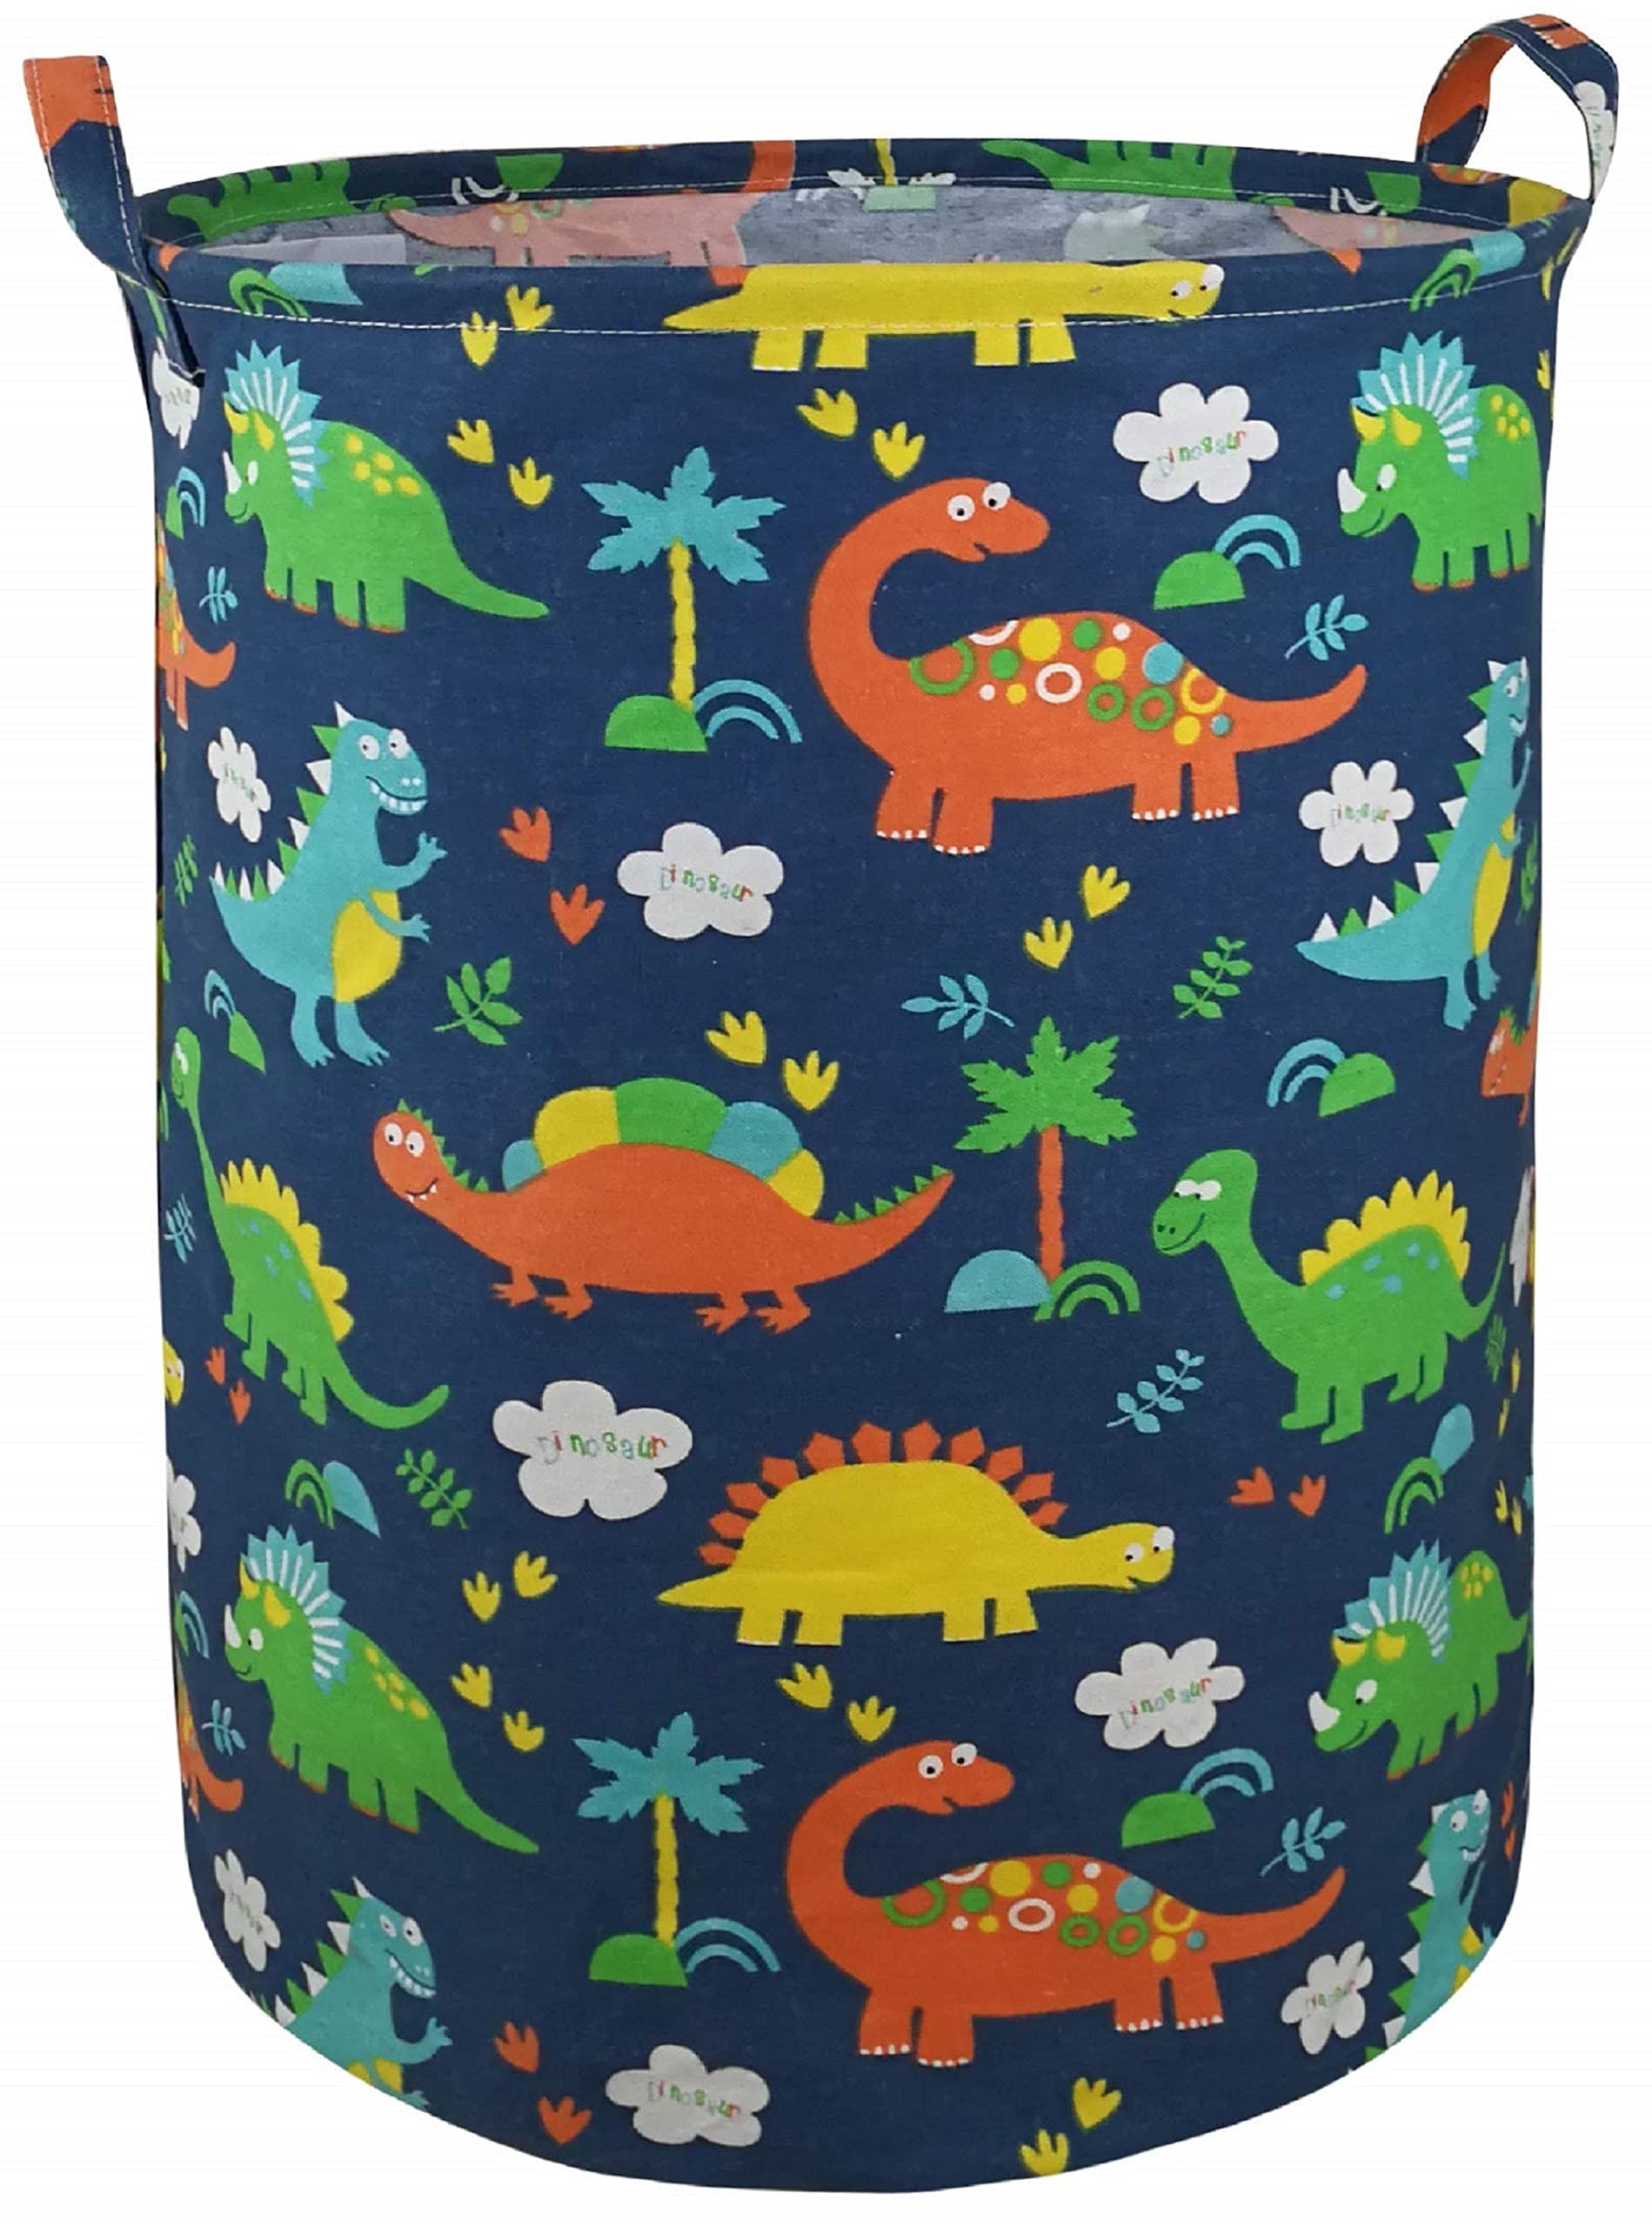 Dinosaur DUYIY Canvas Storage Basket with Handle Large Organizer Bins for Dirty Laundry Hamper Baby Toys Nursery Kids Clothes Gift Basket 